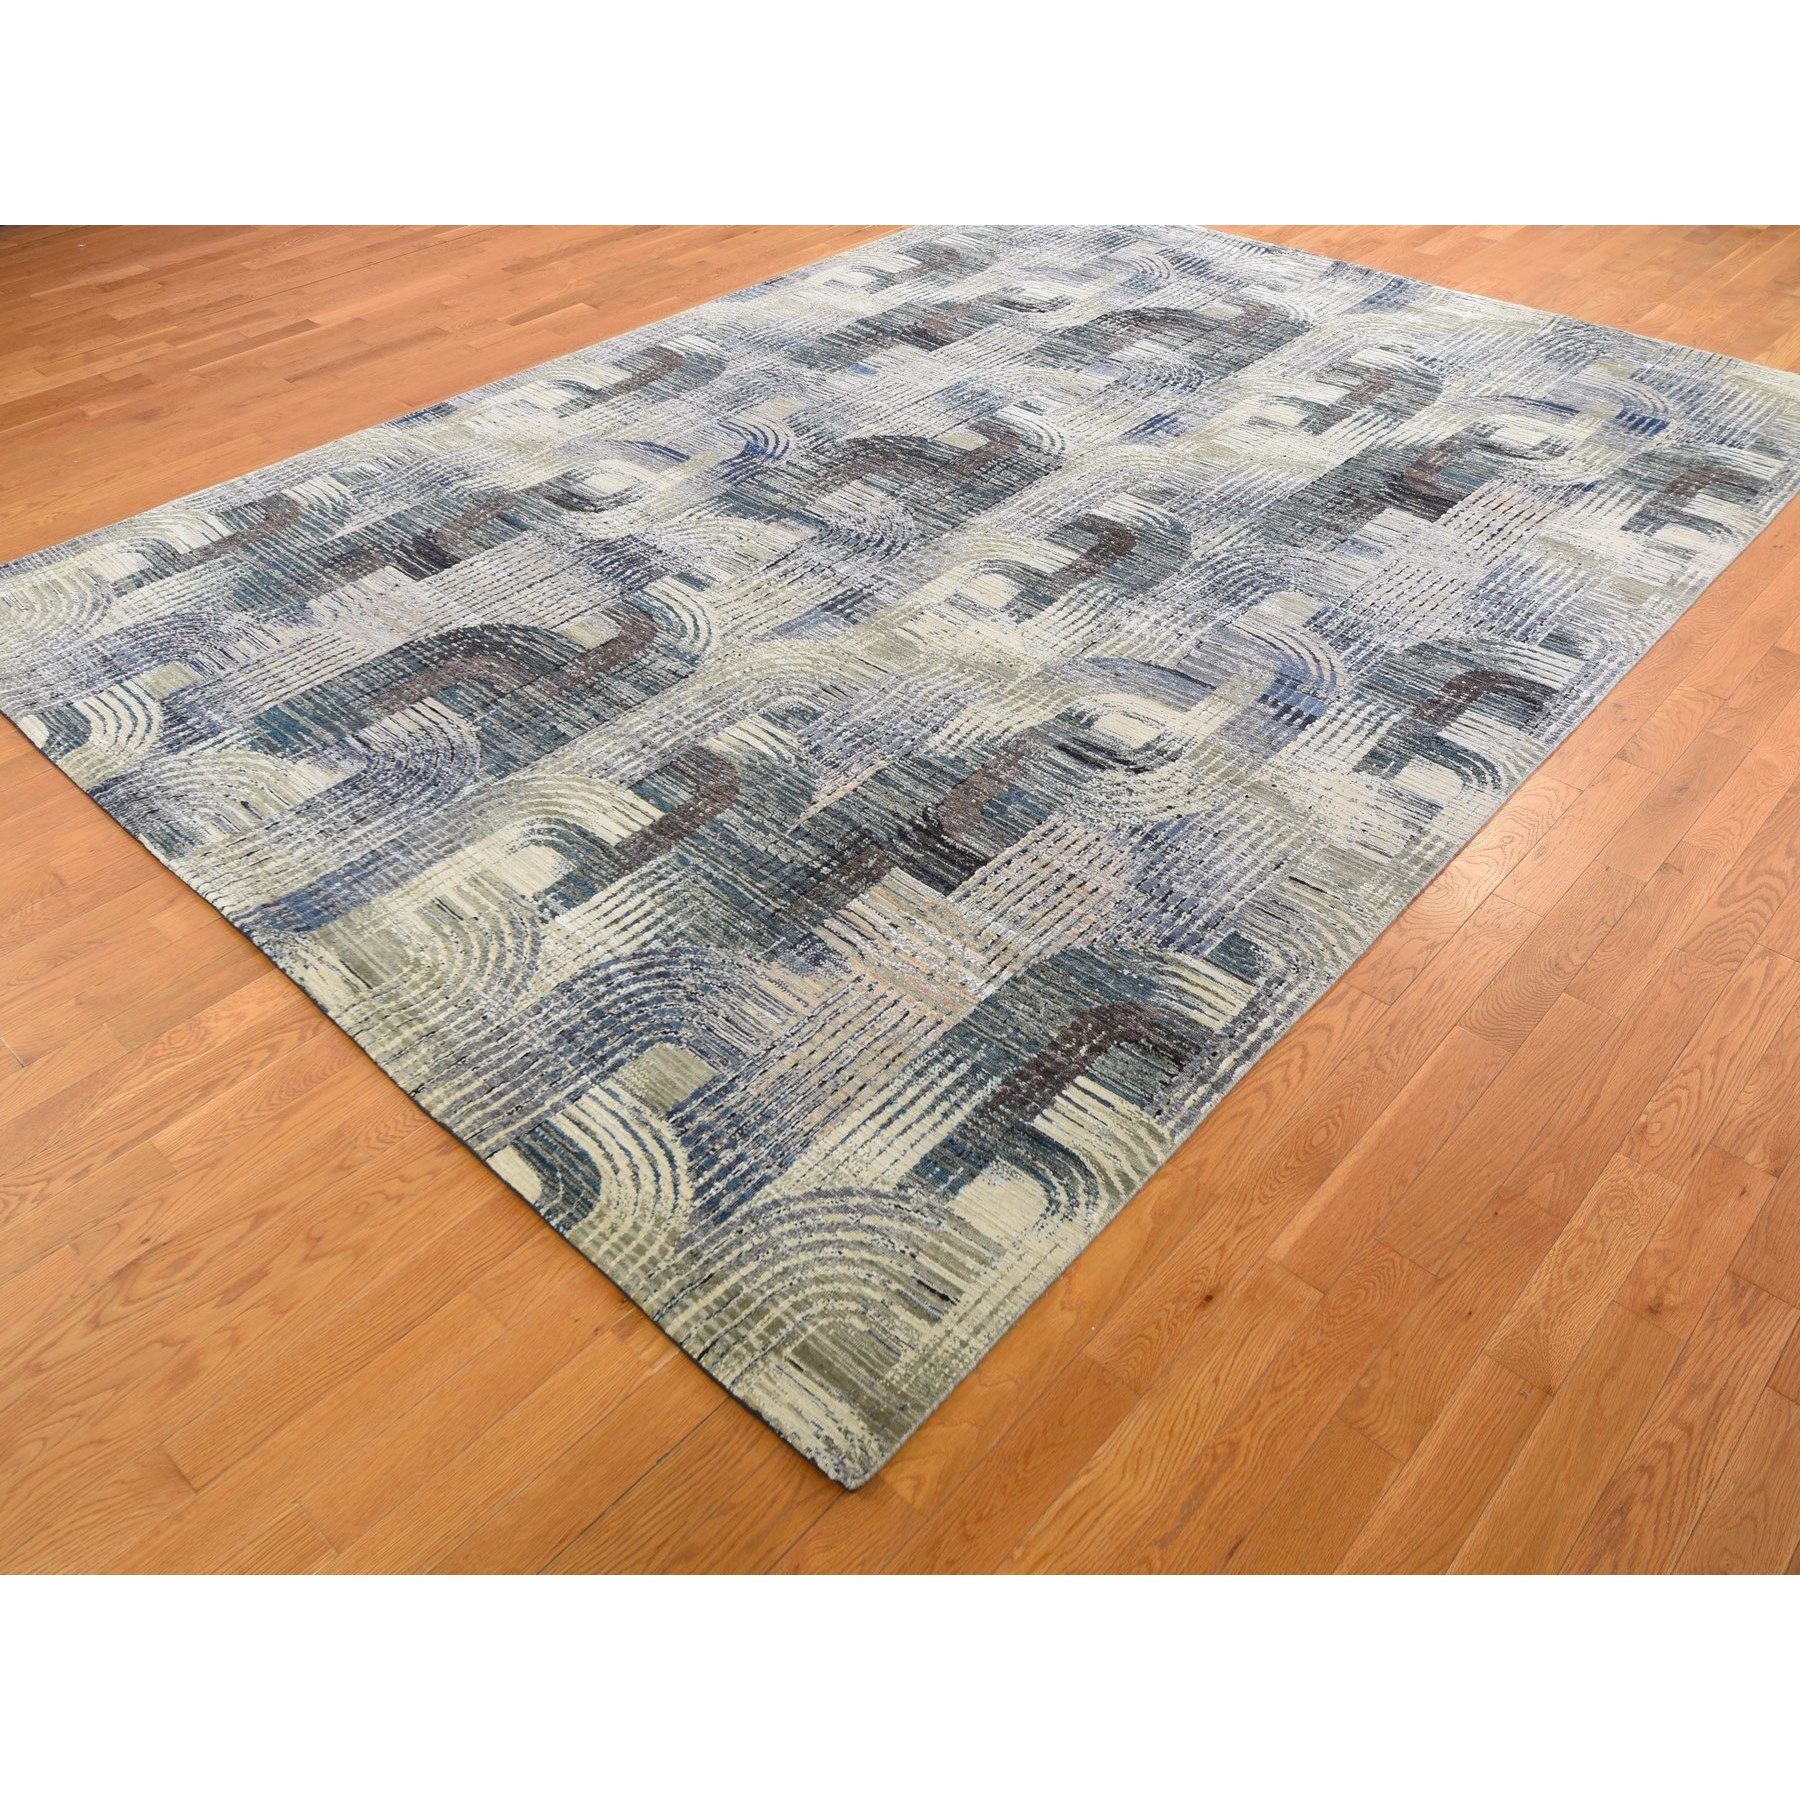 9'x12'3" Gray, THE INTERTWINED PASSAGE, Silk with Textured Wool Hand Woven Oriental Rug 